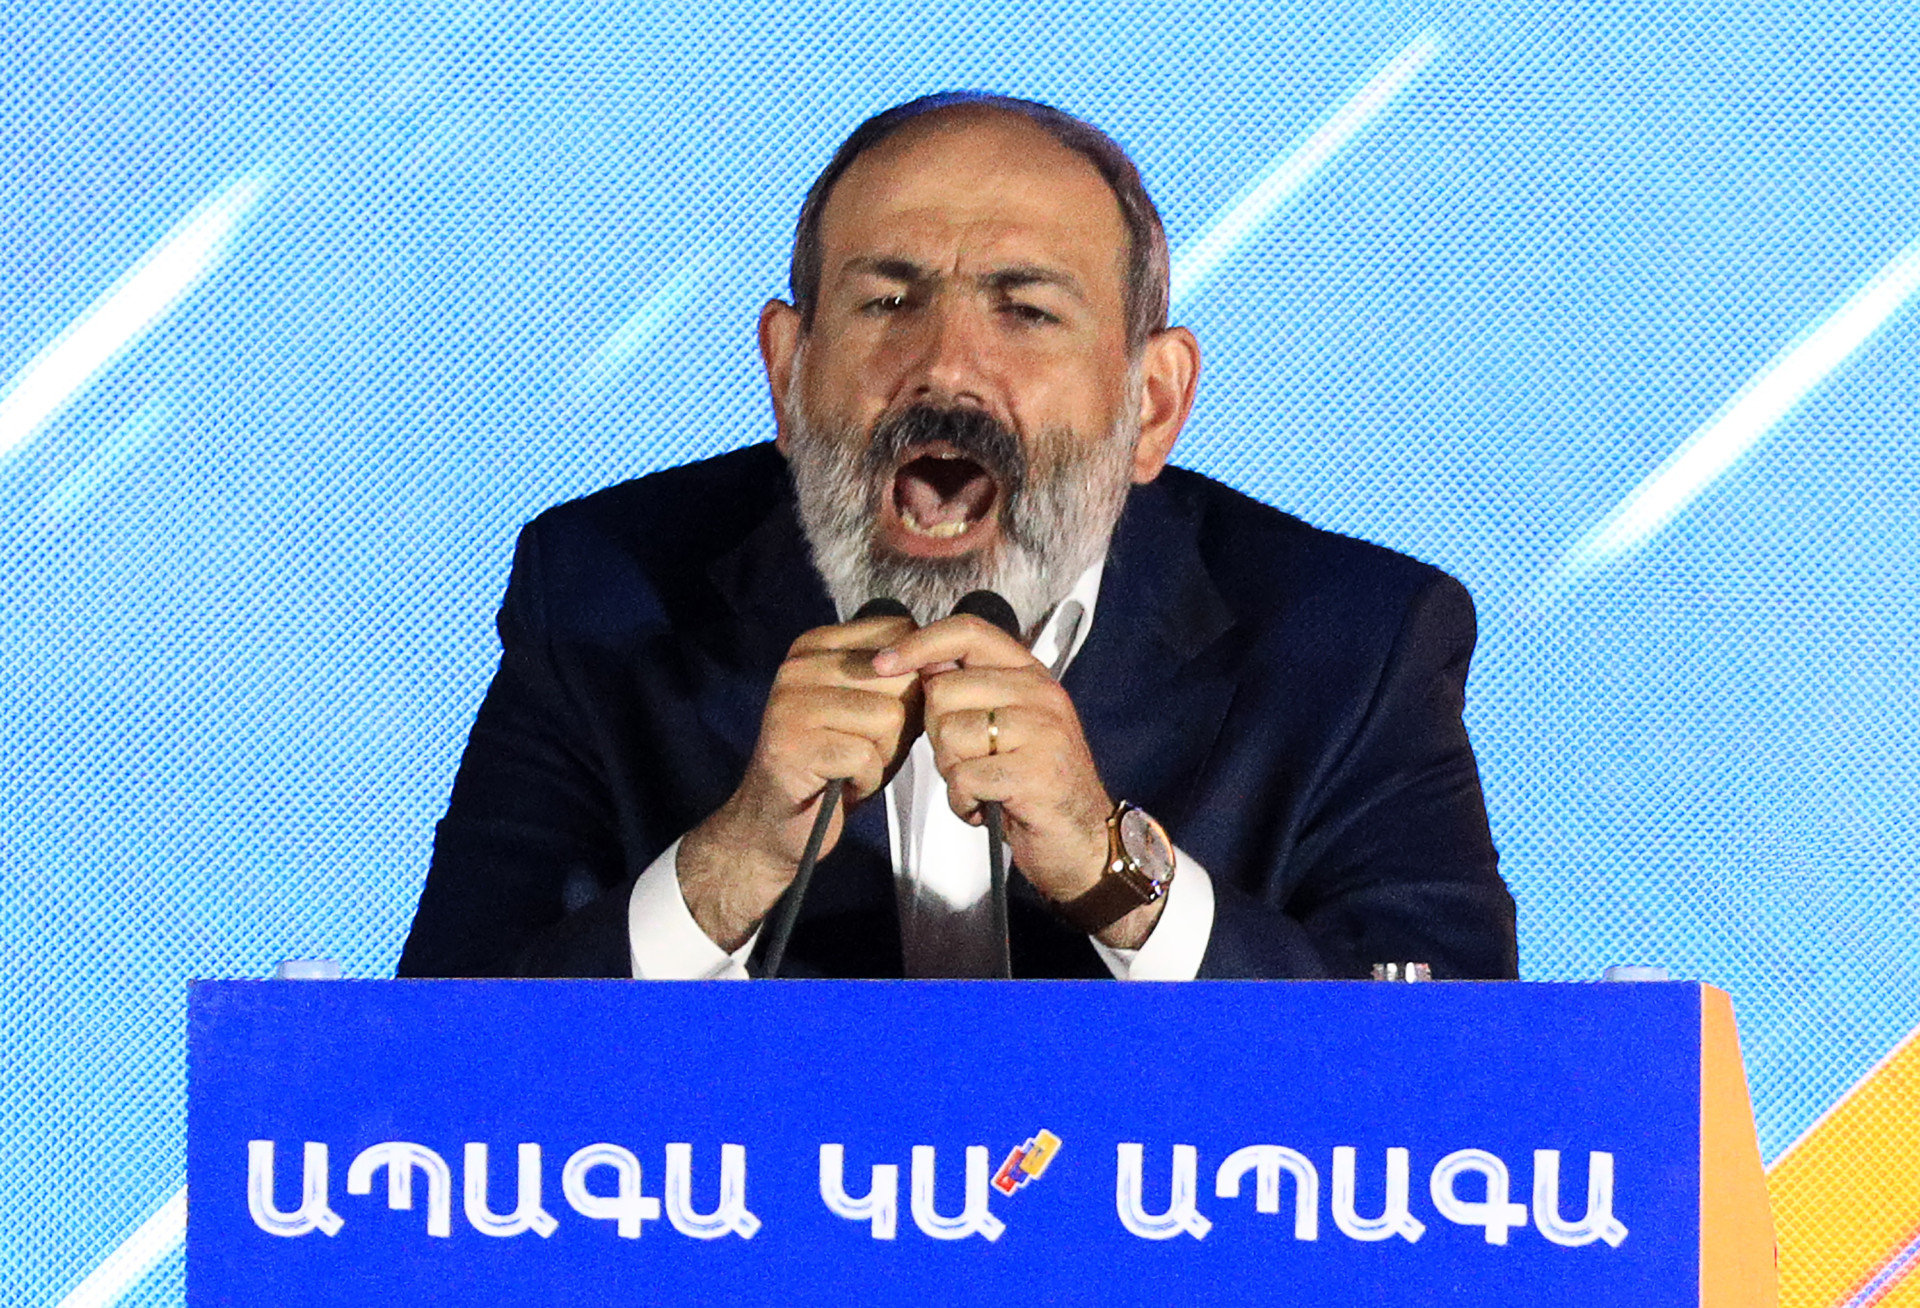 Rally in support of acting PM Pashinyan in Yerevan